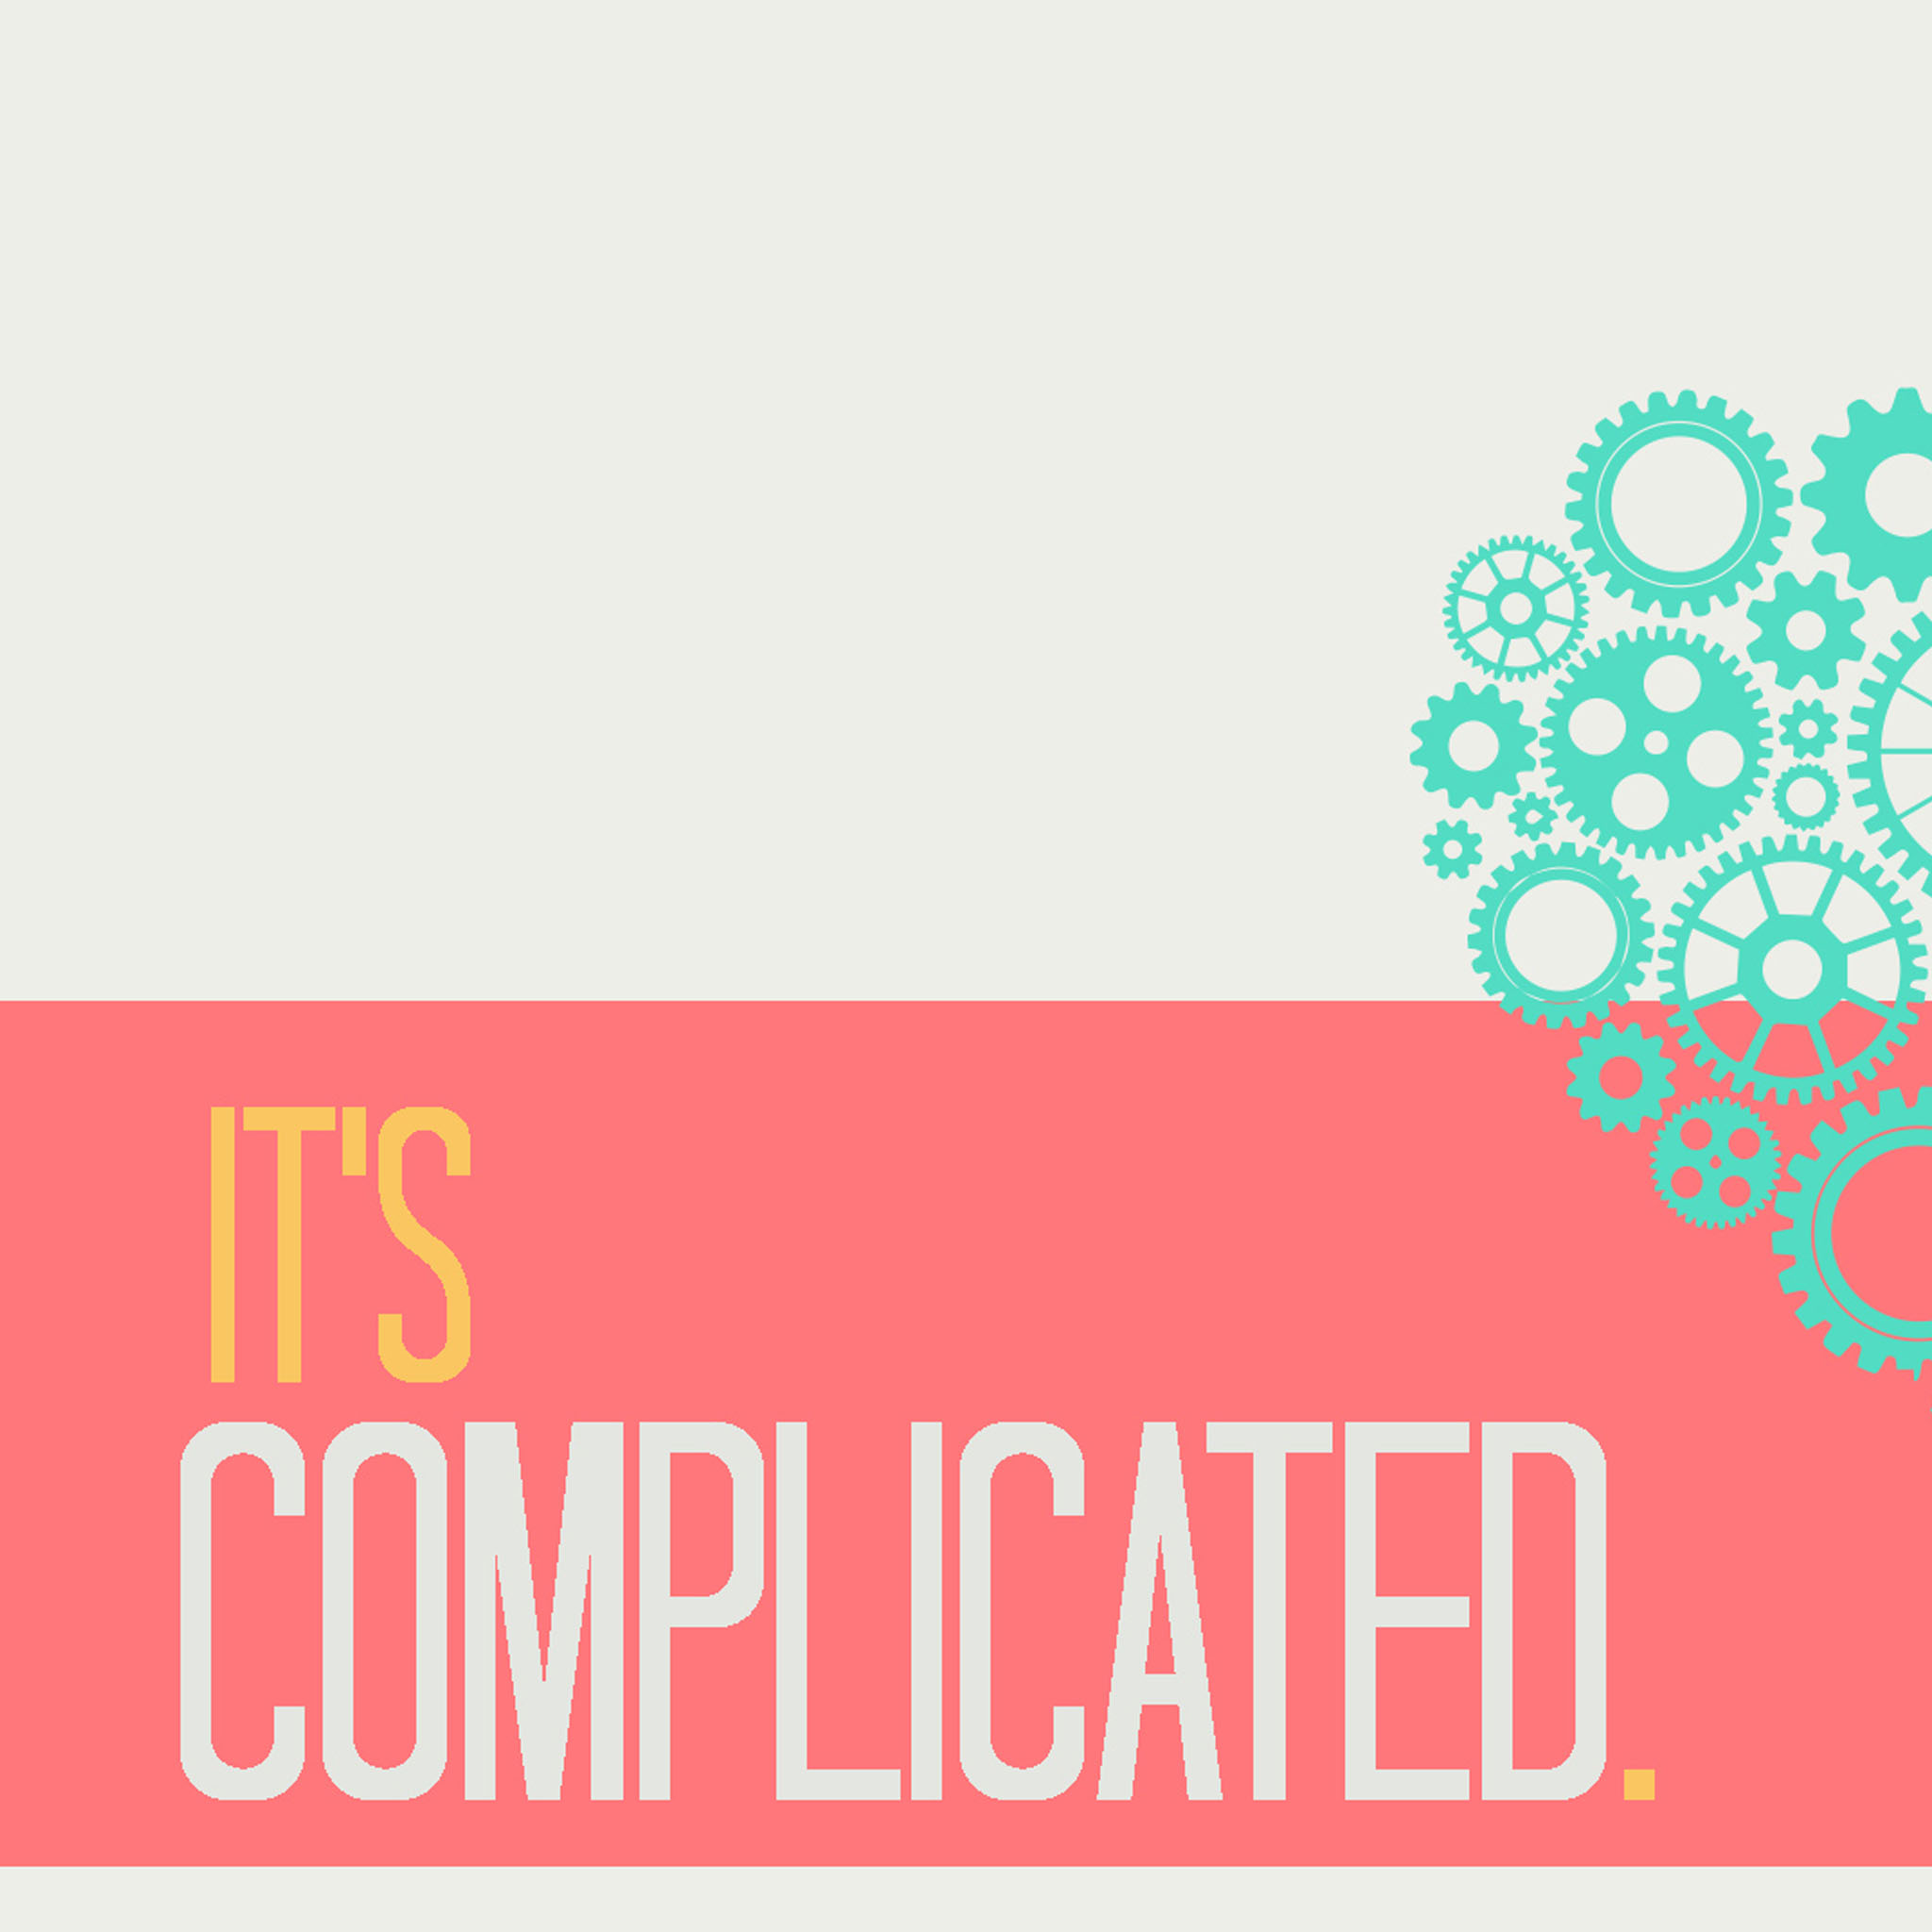 It's Complicated - Why is my marriage falling apart?